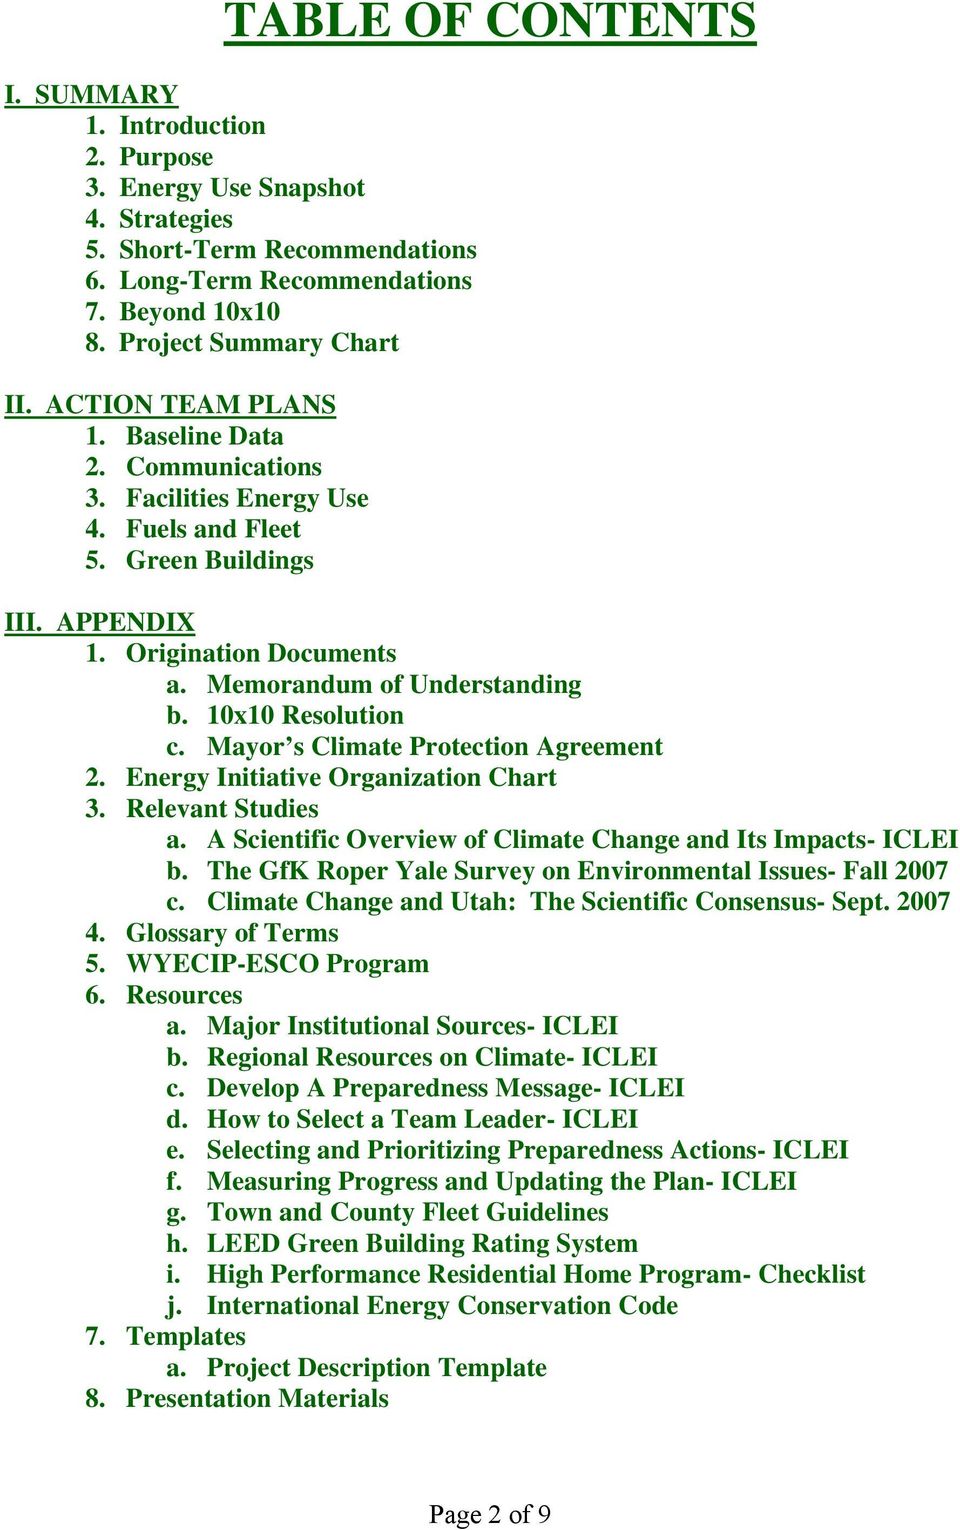 10x10 Resolution c. Mayor s Climate Protection Agreement 2. Energy Initiative Organization Chart 3. Relevant Studies a. A Scientific Overview of Climate Change and Its Impacts- ICLEI b.